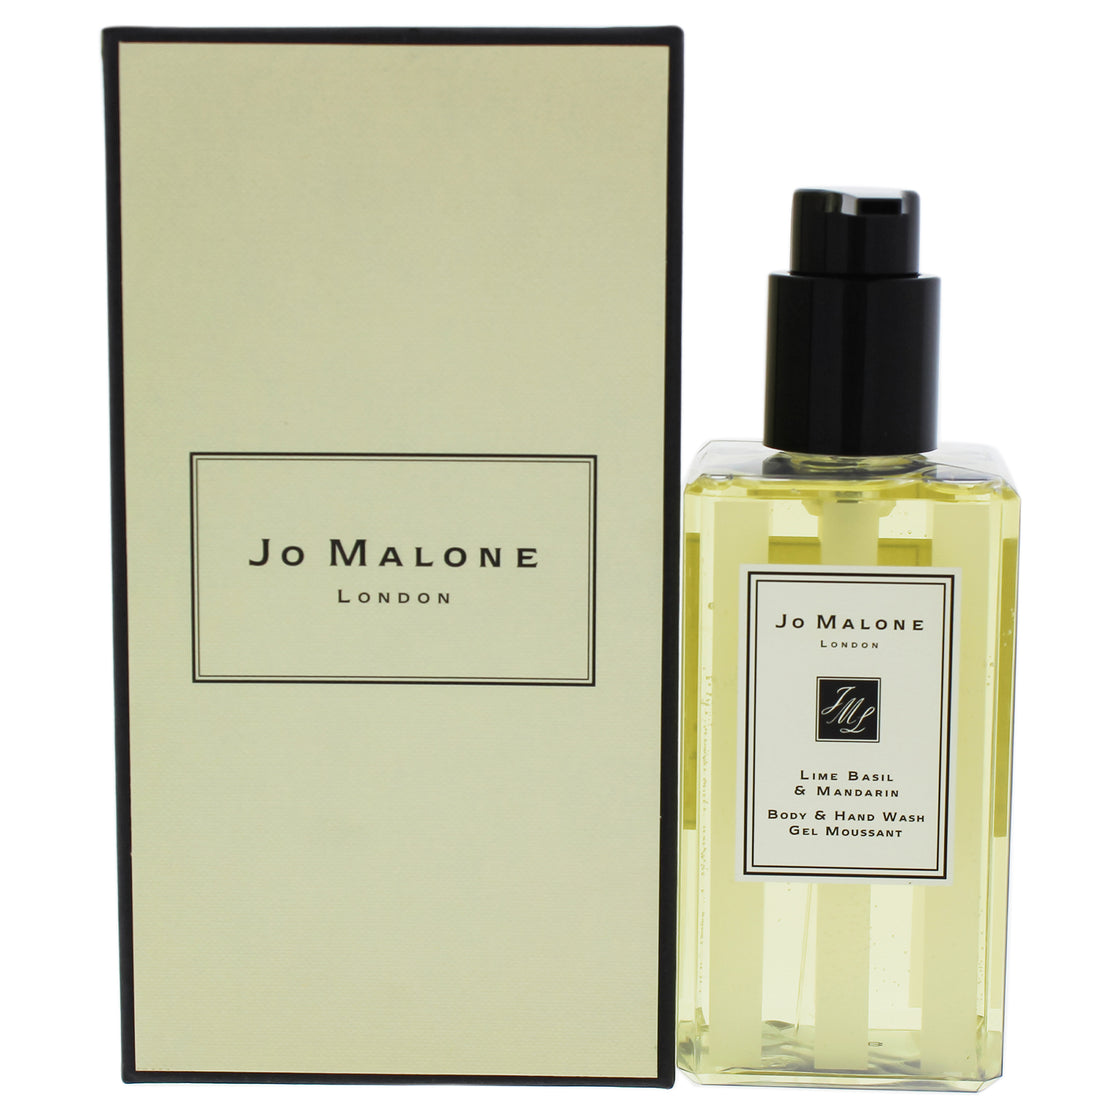 Lime Basil and Mandarin Hand and Body Wash by Jo Malone for Unisex - 8.4 oz Body Wash